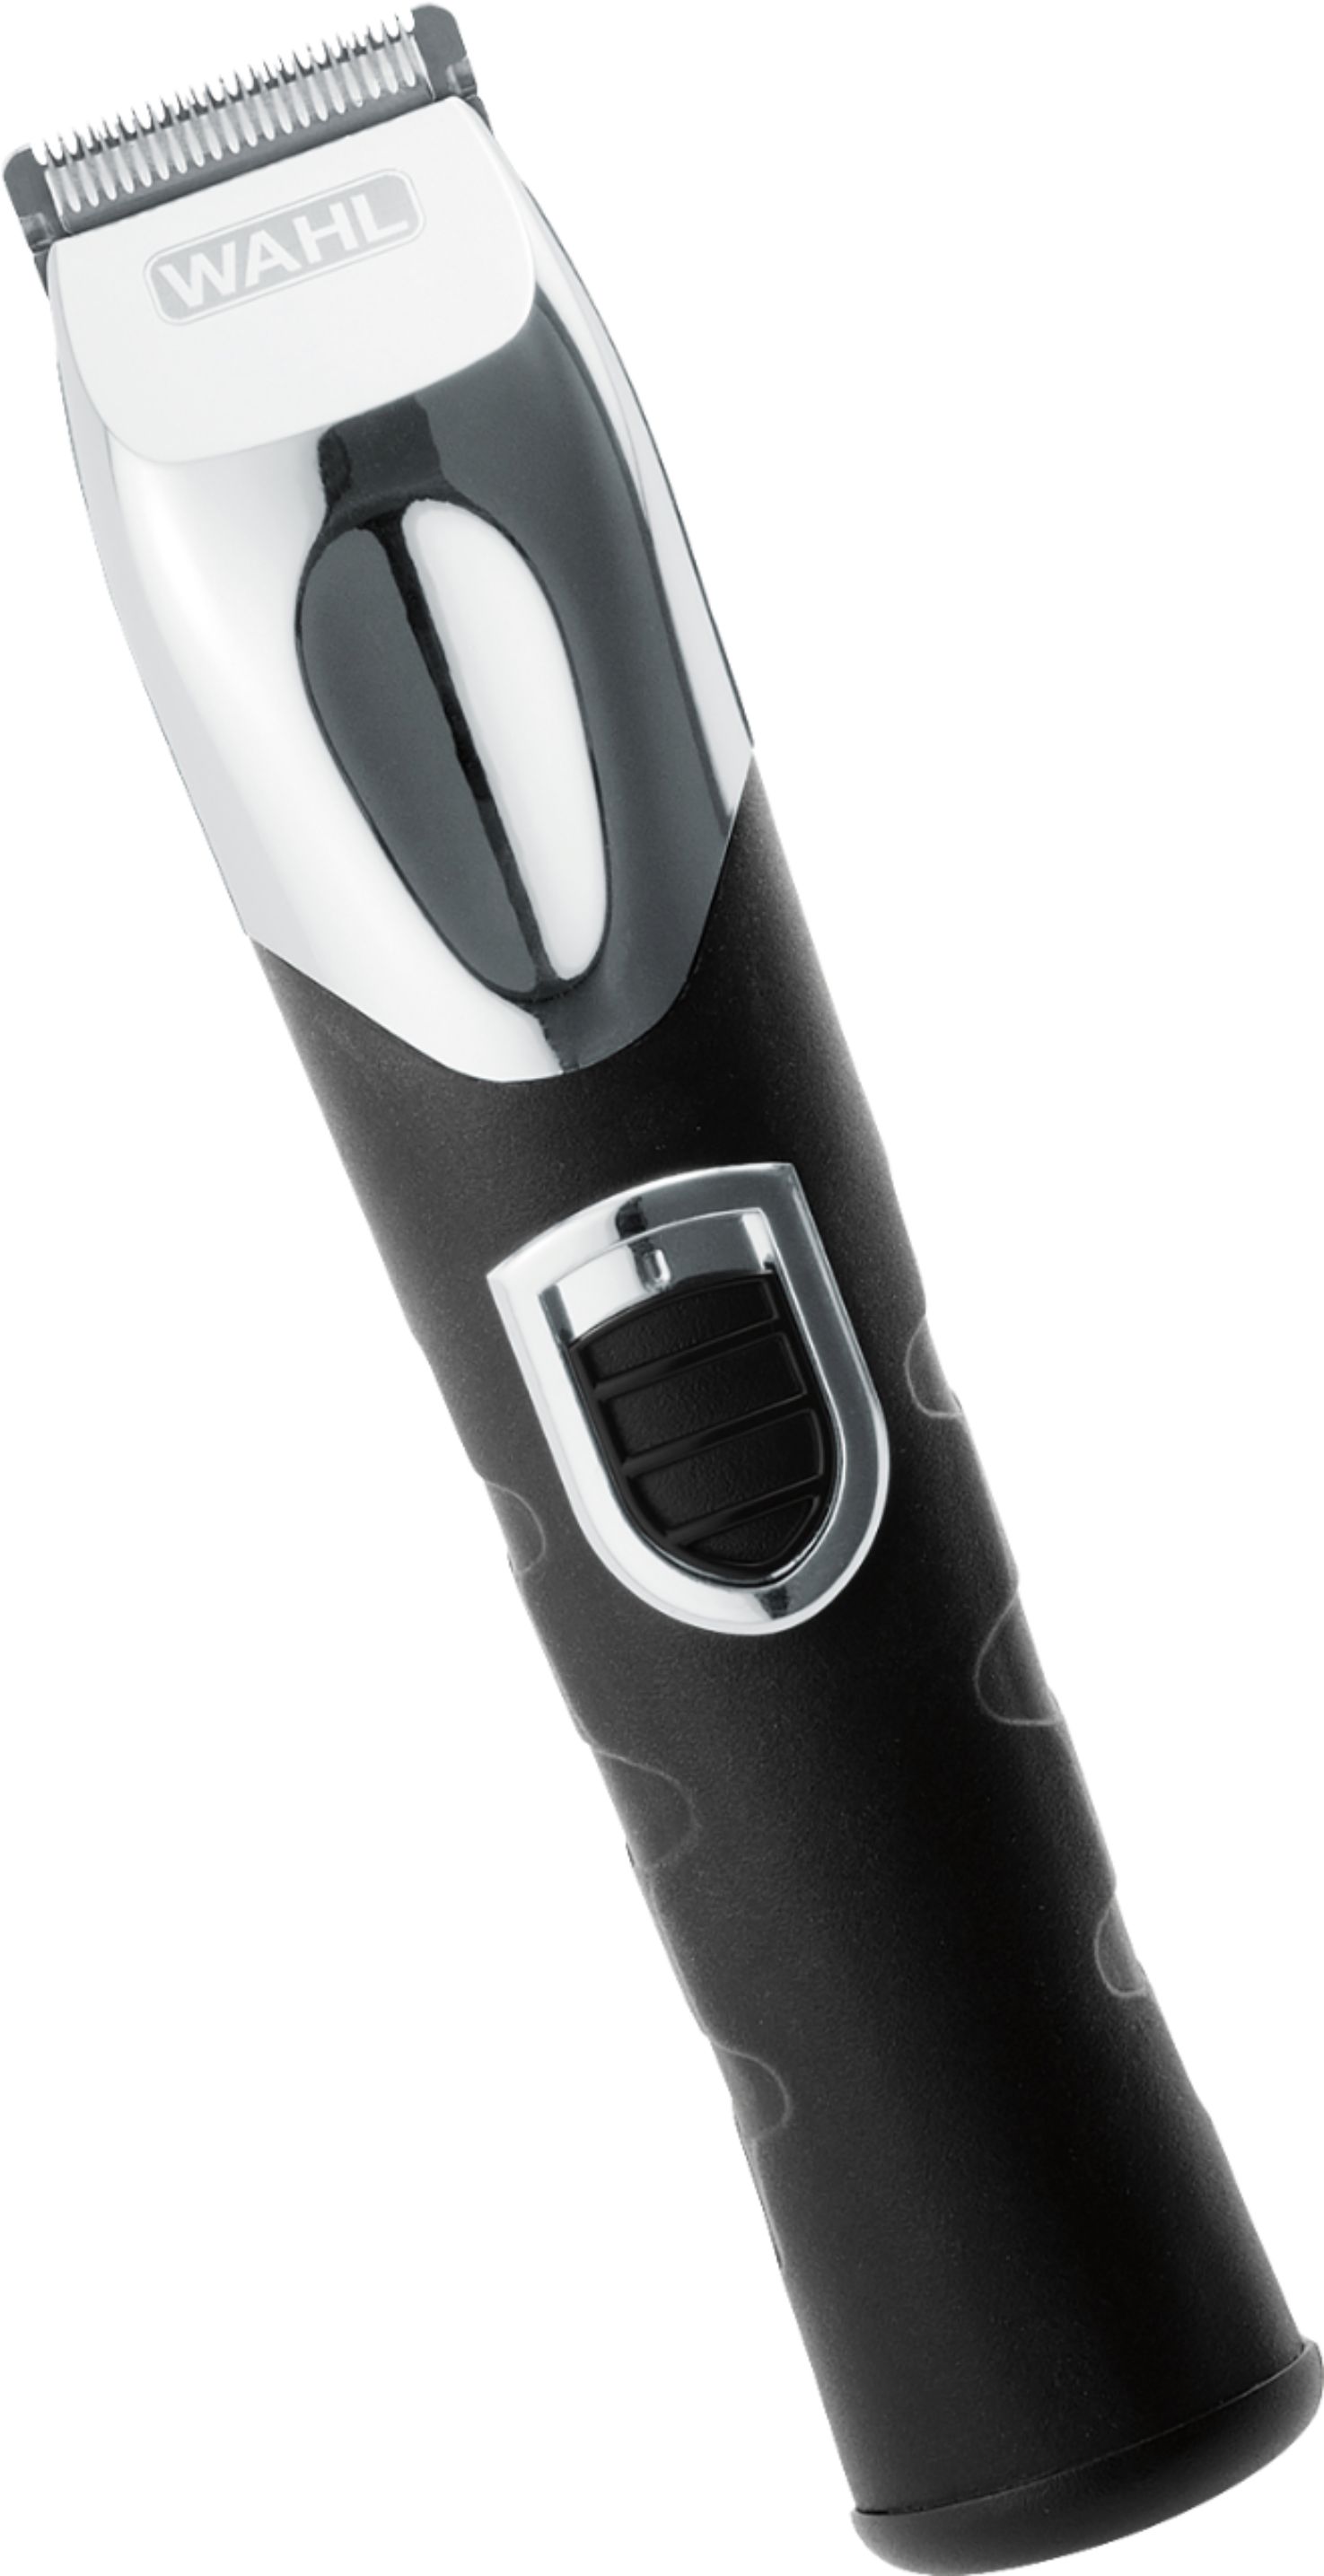 Angle View: Wahl - Trimmer with 13 Guide Combs - Black/Silver